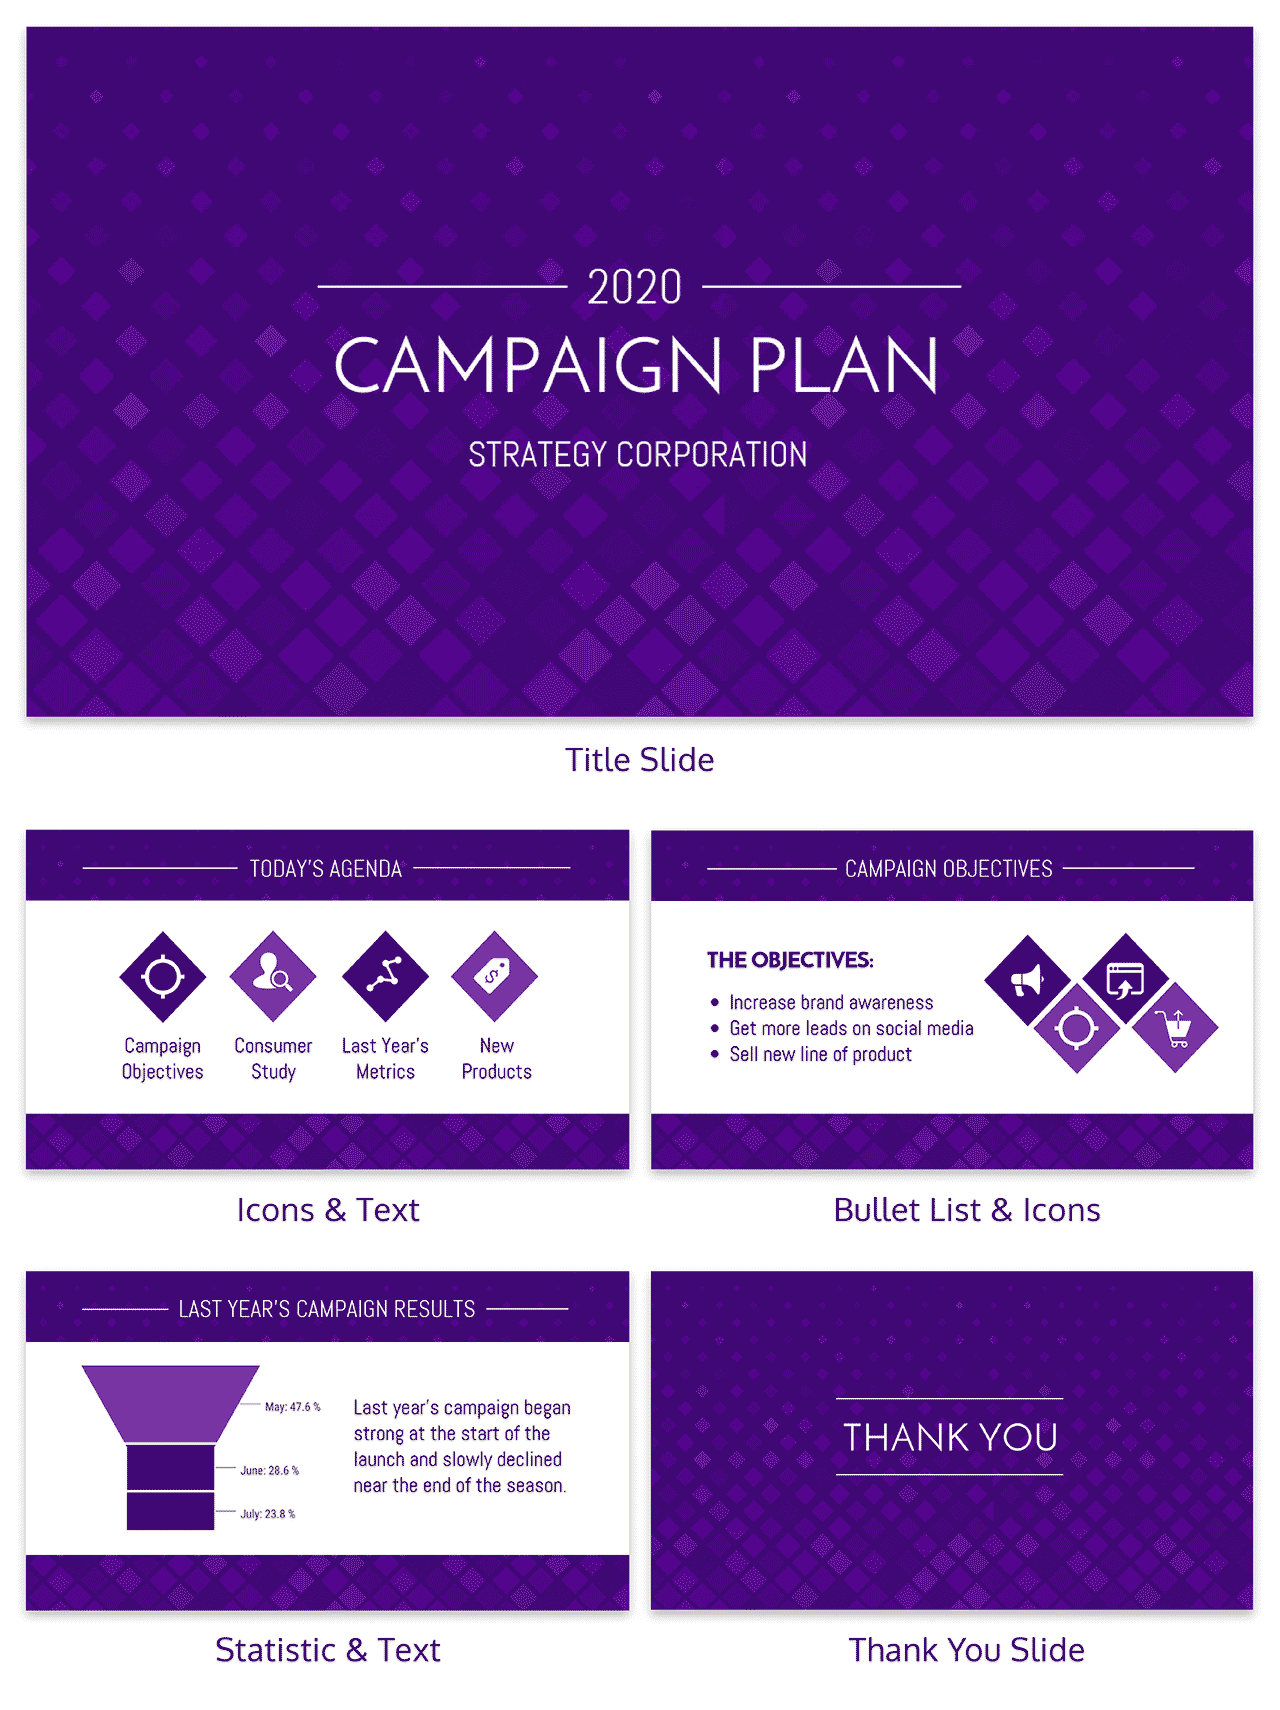 Example of Campaign Planning Template